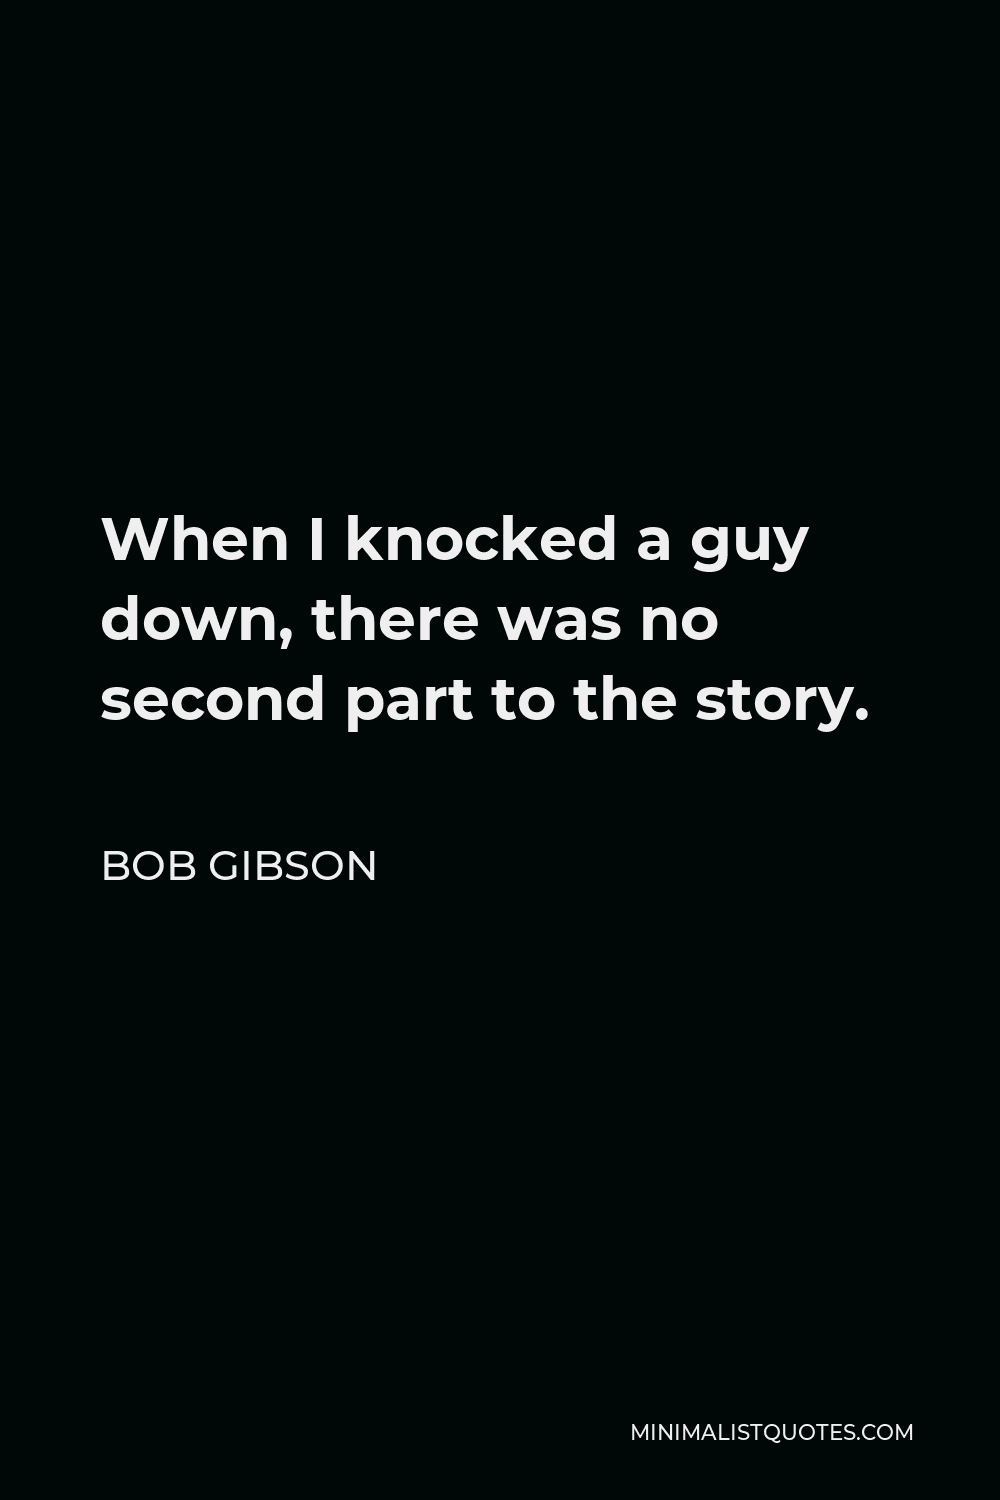 Bob Gibson Quote - When I knocked a guy down, there was no second part to the story.